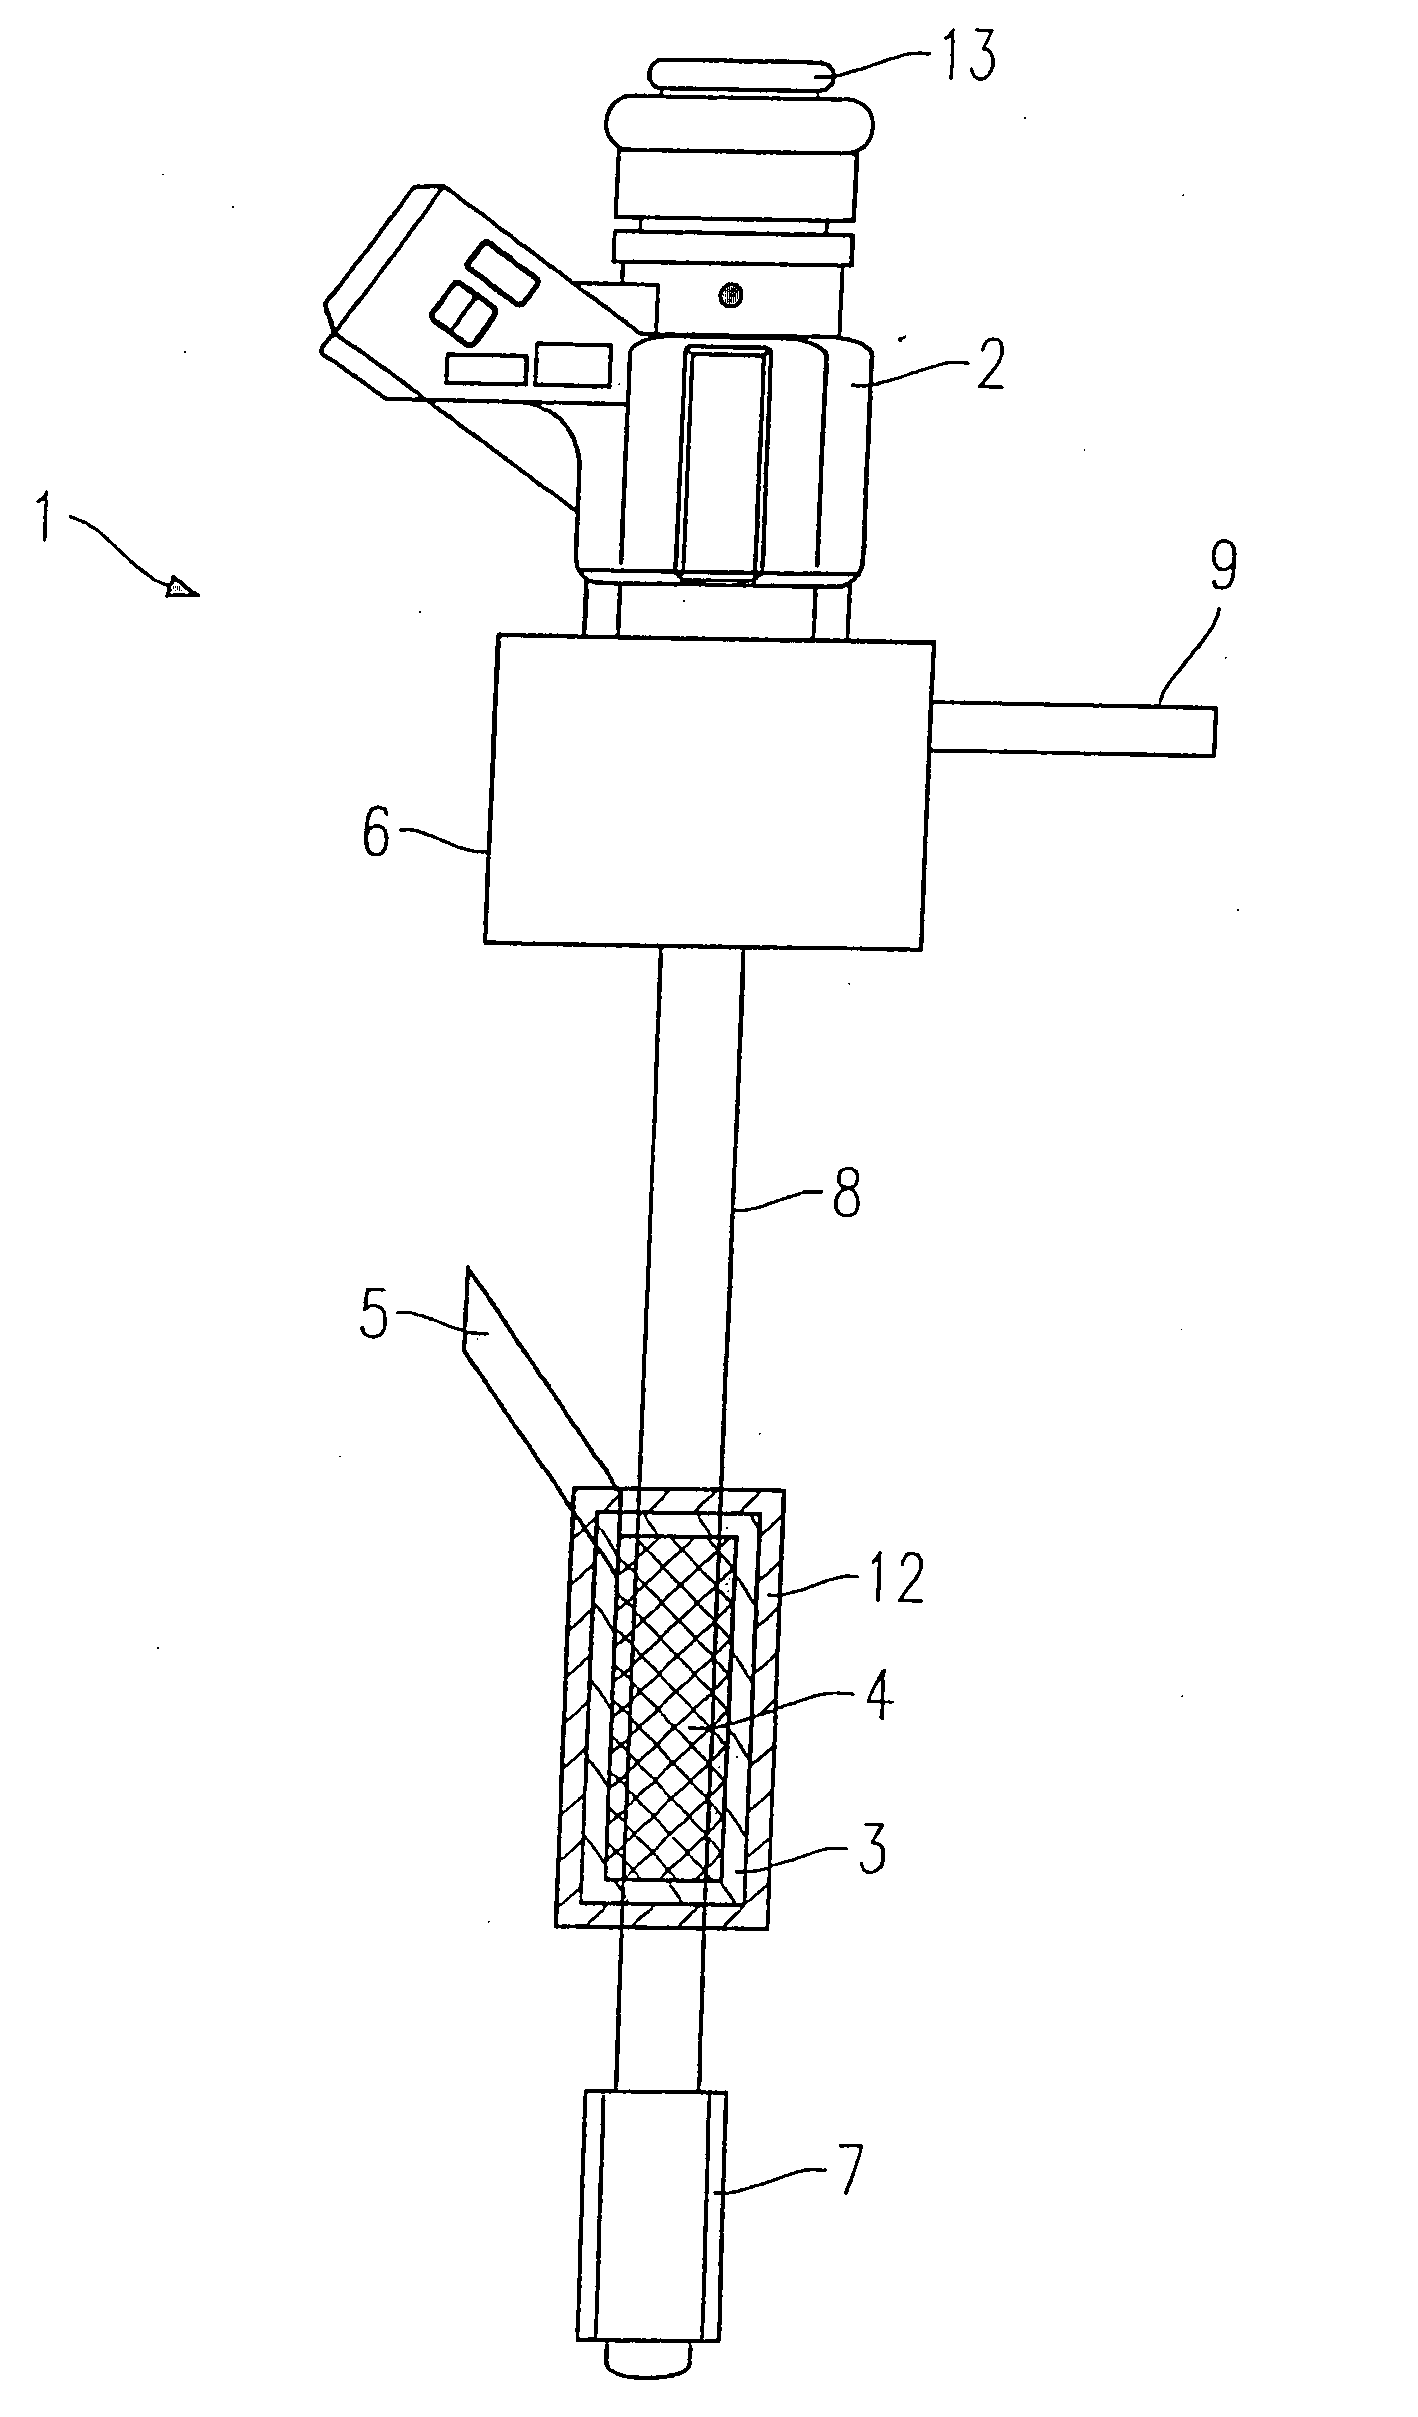 Heated metering device for the reformer of a fuel cell arrangement